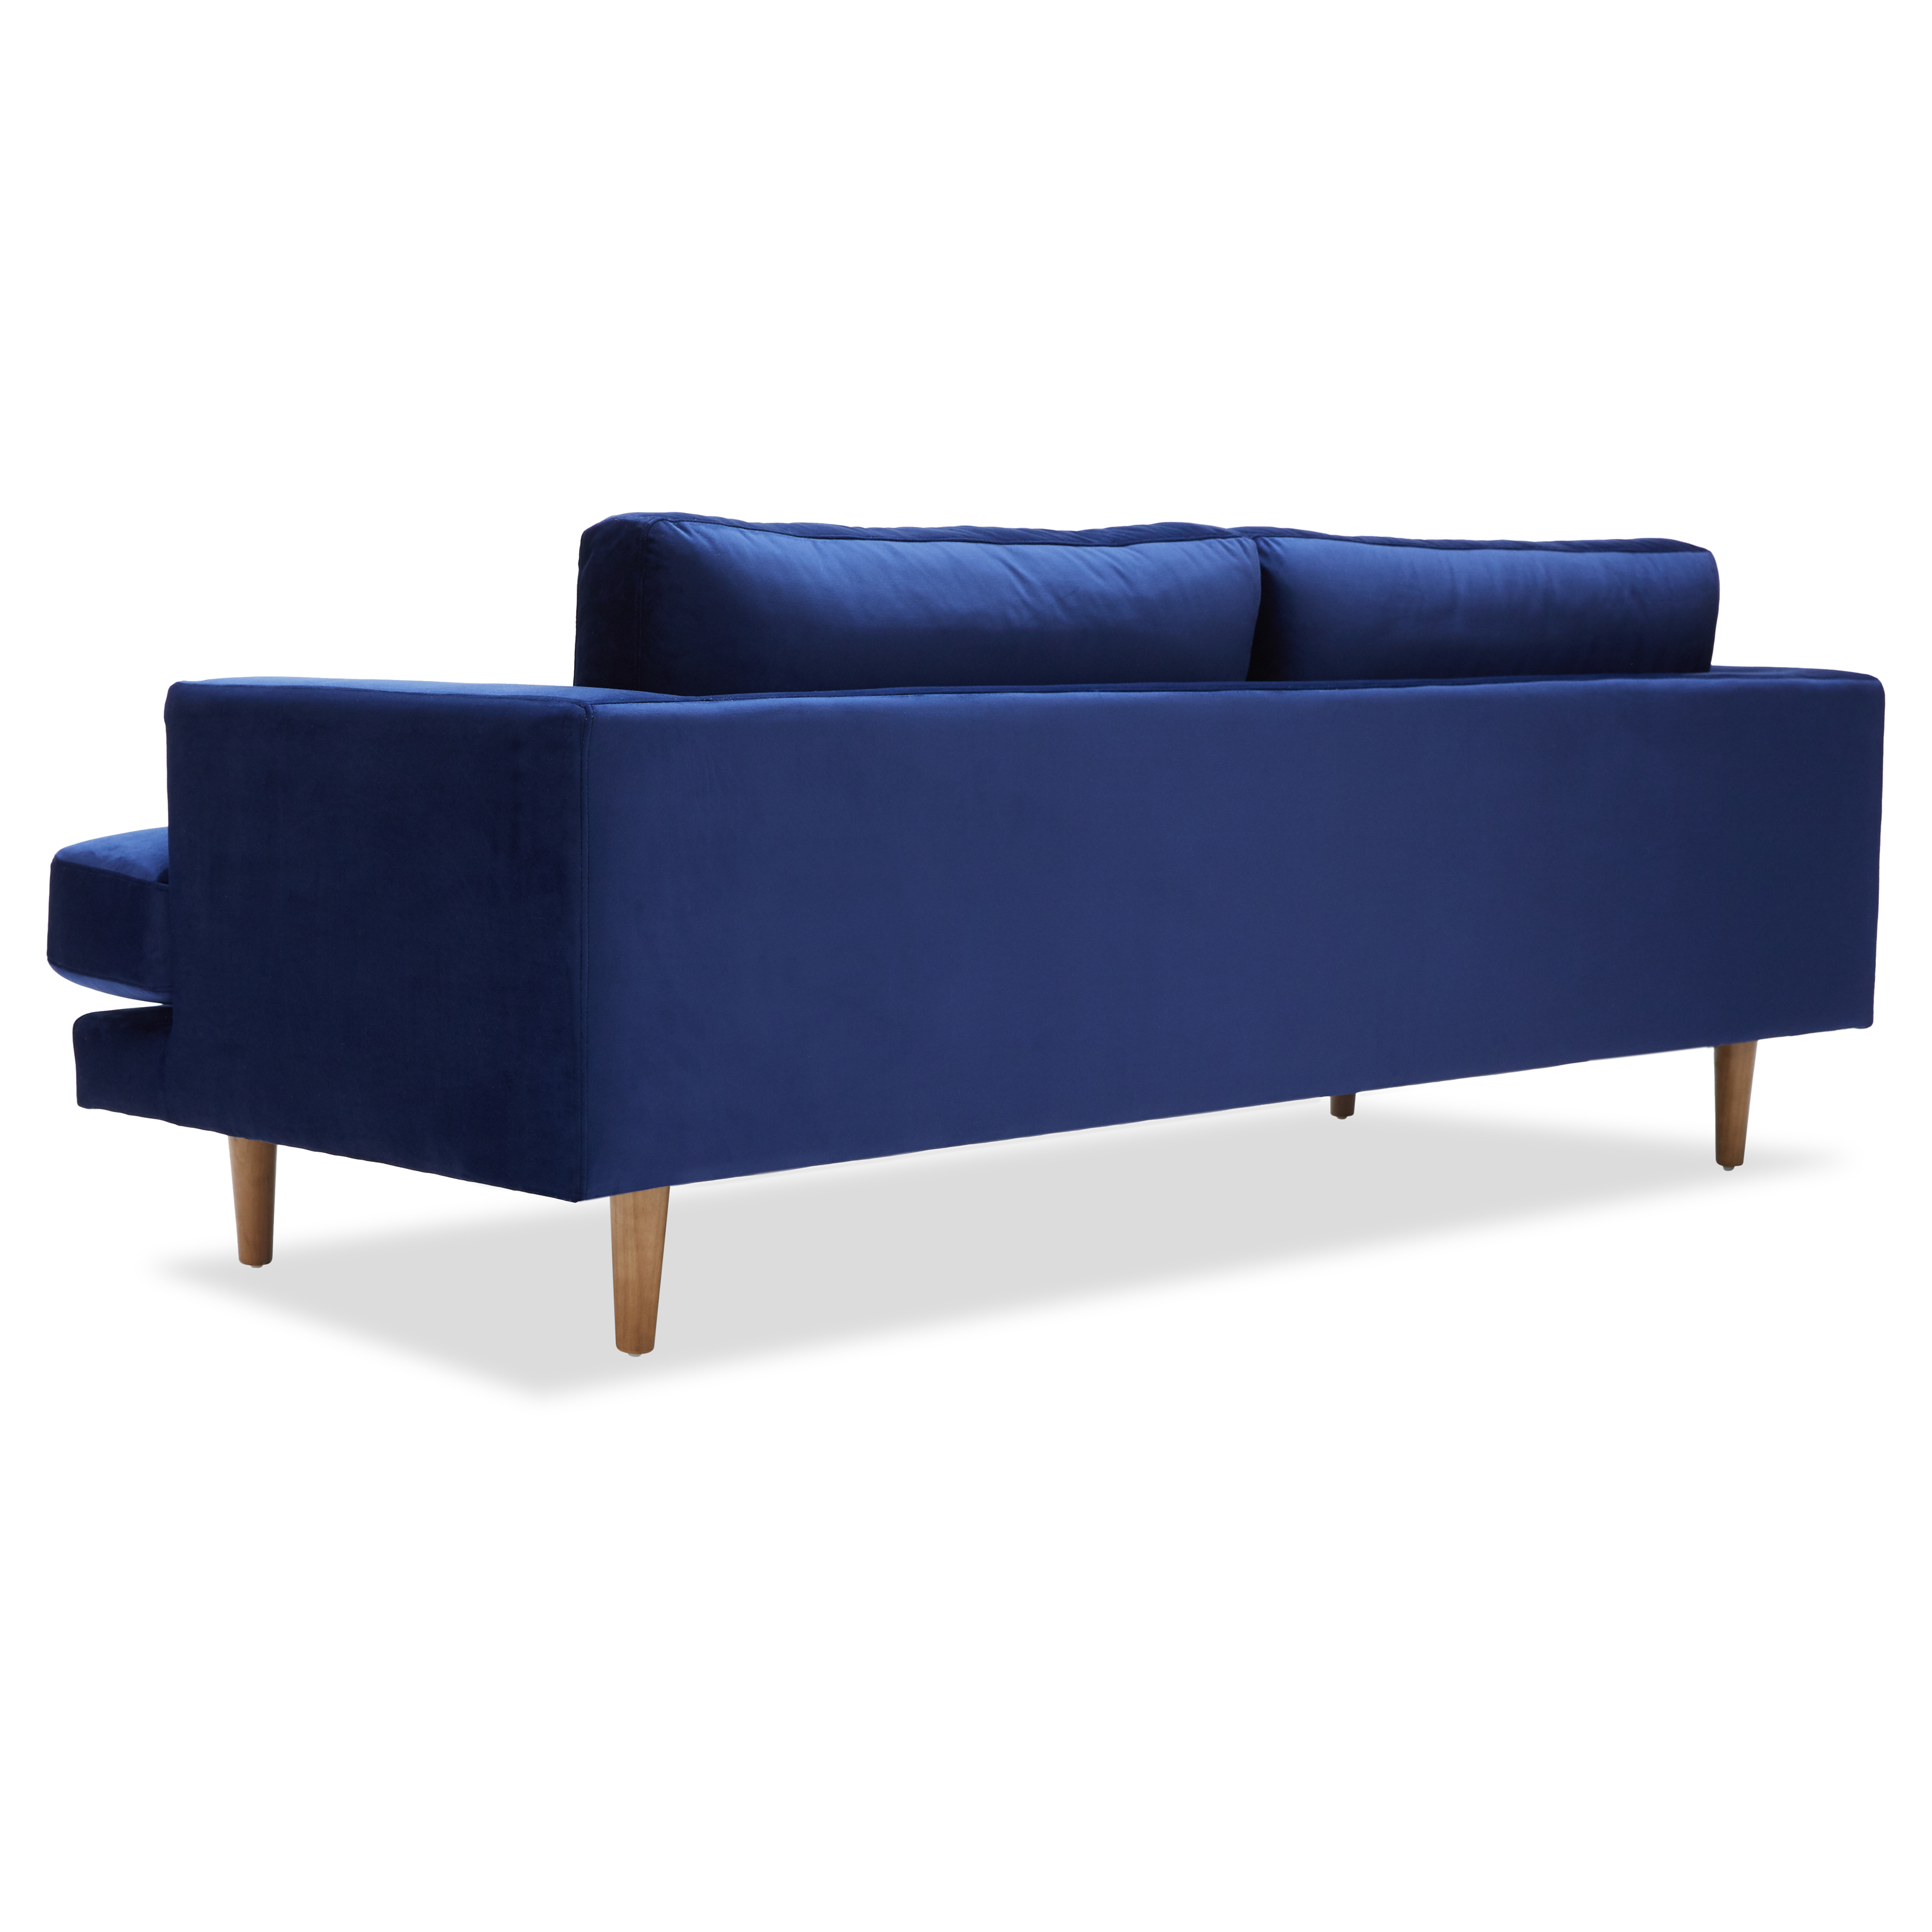 Drew Barrymore Flower Home Sofa, Multiple Colors - image 5 of 12